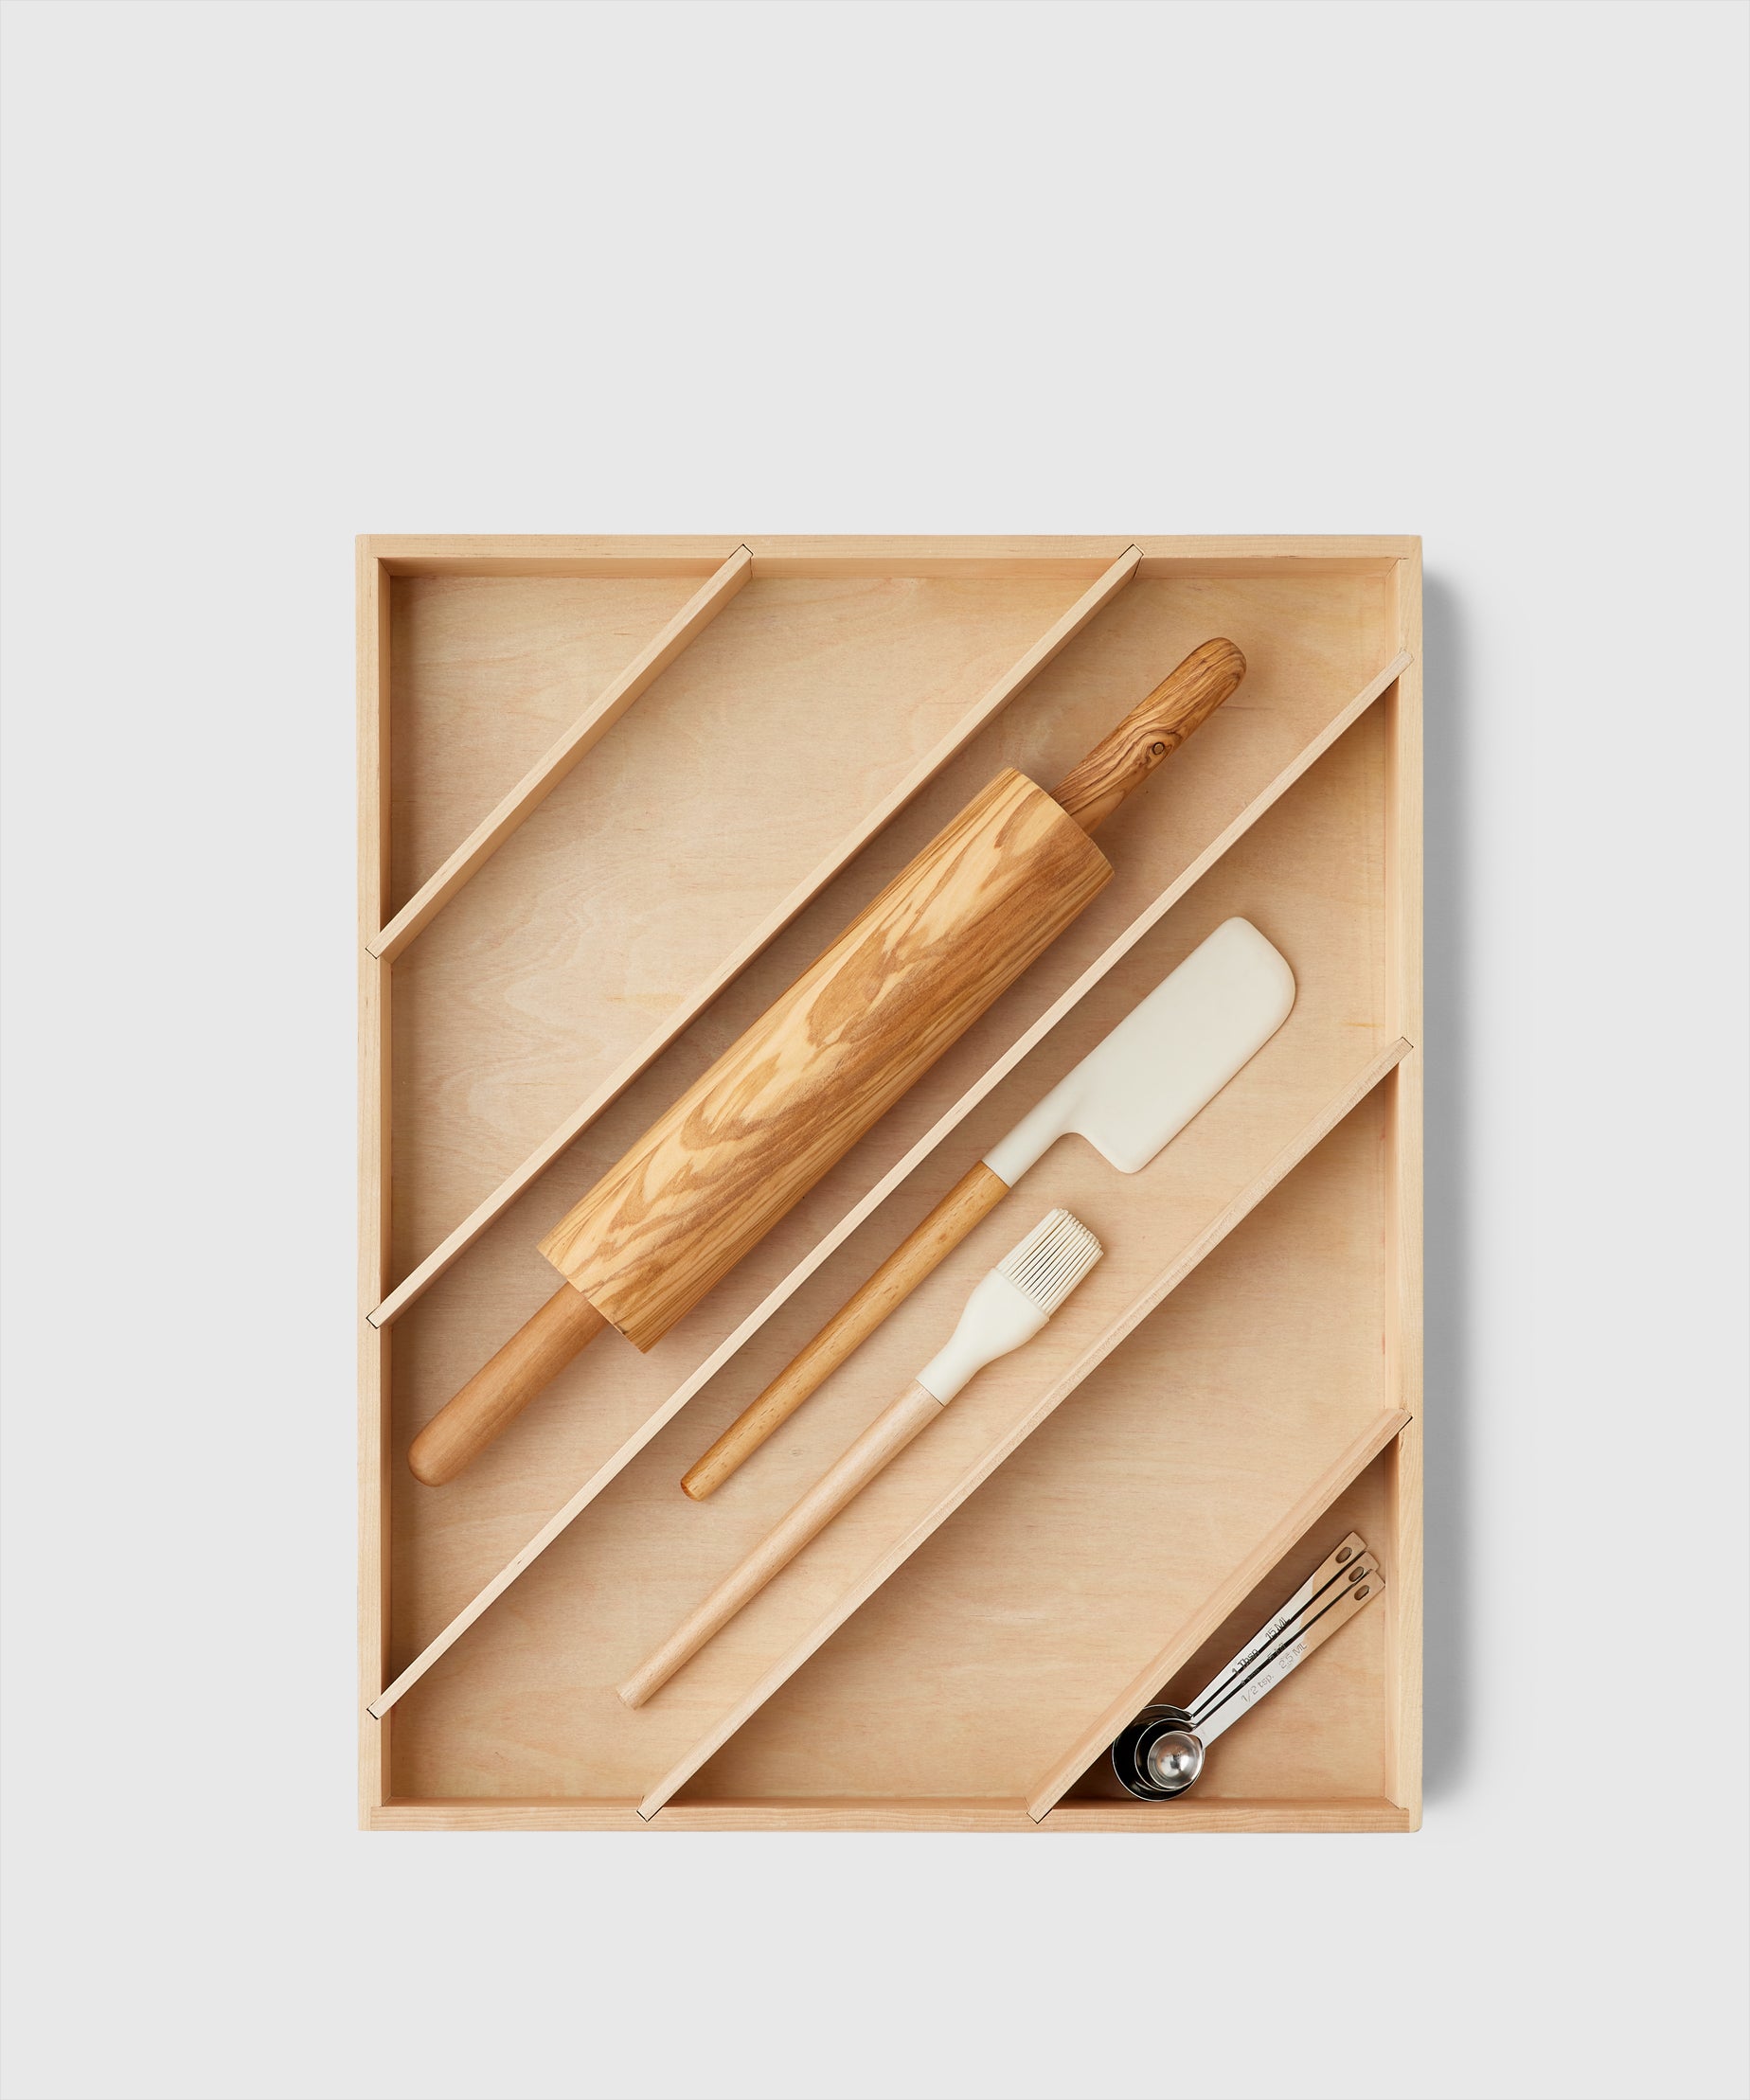 Birch Wide Utensil Organizer With Diagonal Compartments by Marie Kondo